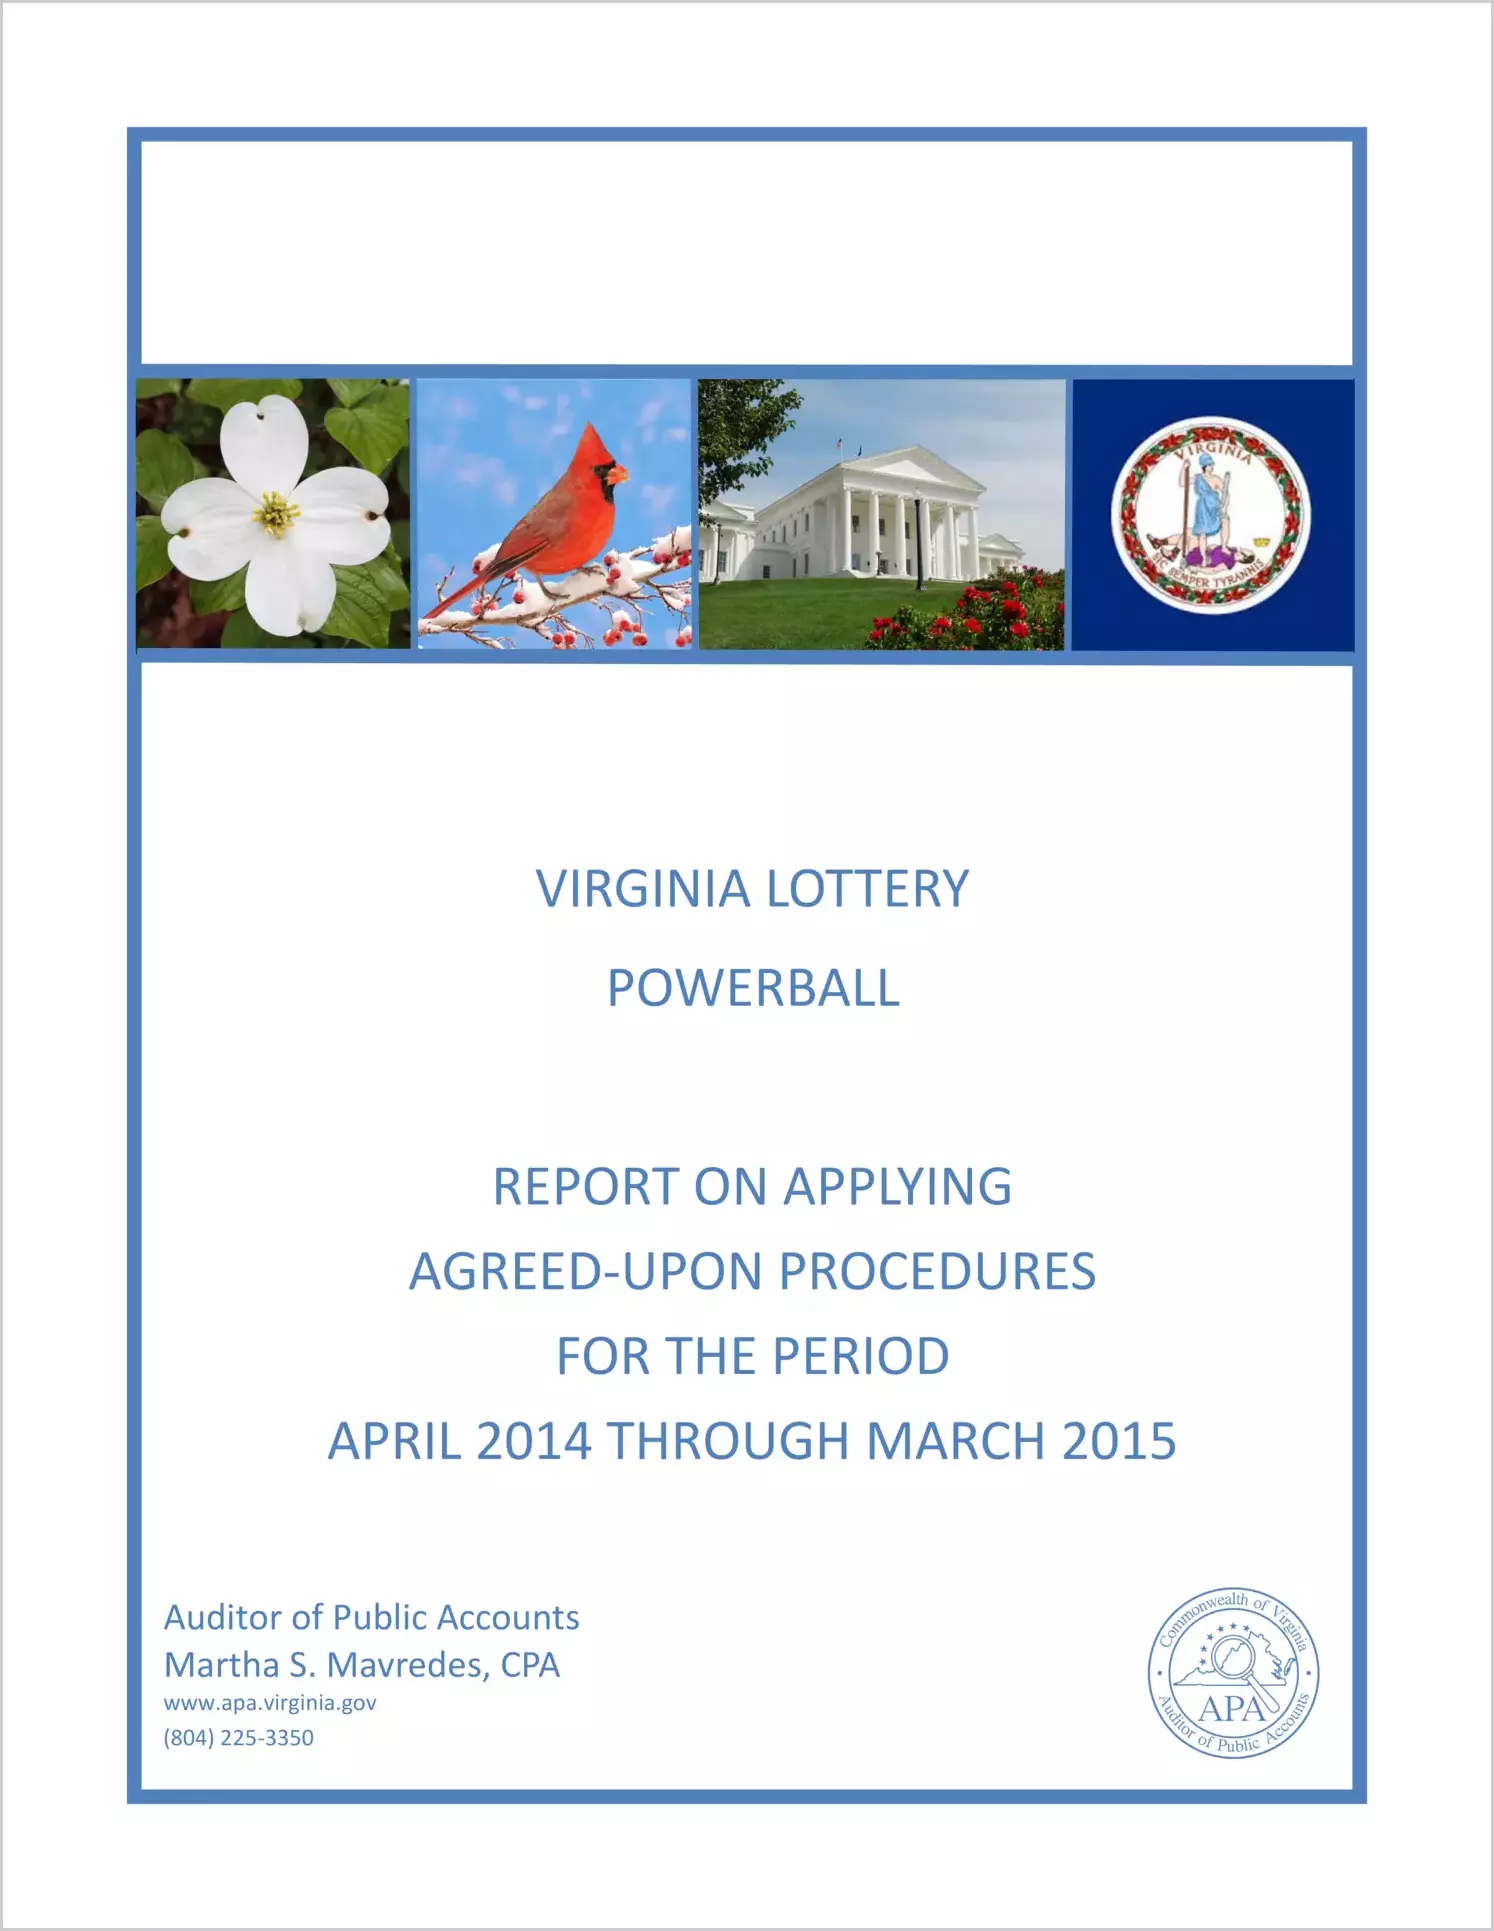 VA Lottery Powerball report on Applying Agreed-Upon Procedures for the period April, 2014 through March, 2015